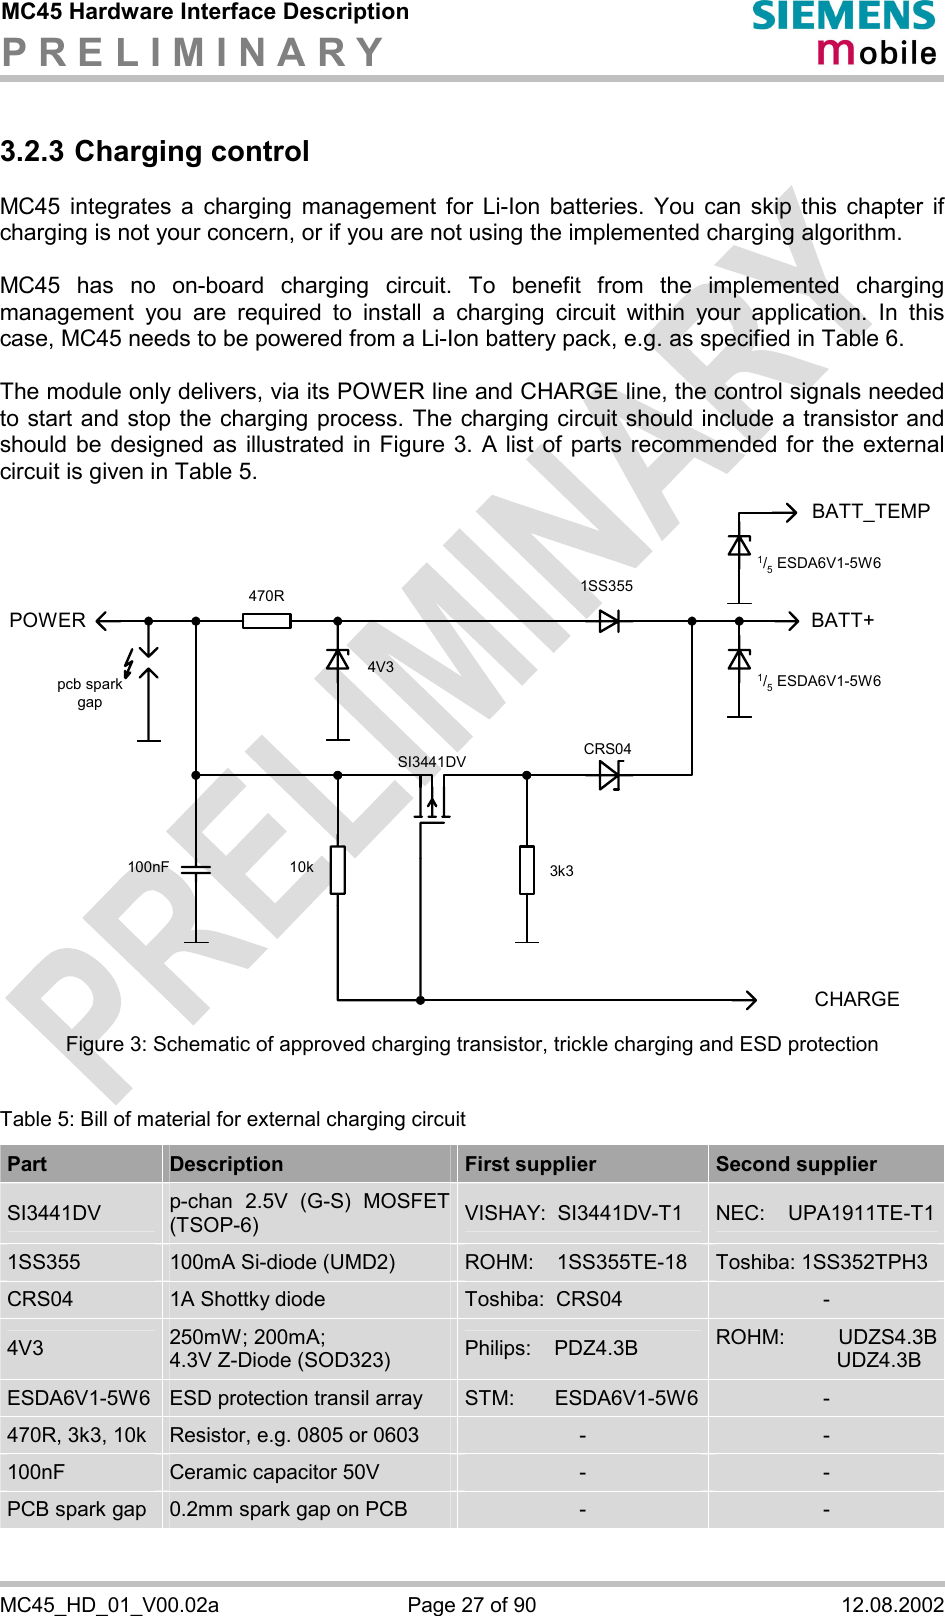 MC45 Hardware Interface Description P R E L I M I N A R Y      MC45_HD_01_V00.02a  Page 27 of 90  12.08.2002 3.2.3 Charging control MC45 integrates a charging management for Li-Ion batteries. You can skip this chapter if charging is not your concern, or if you are not using the implemented charging algorithm.  MC45 has no on-board charging circuit. To benefit from the implemented charging management you are required to install a charging circuit within your application. In this case, MC45 needs to be powered from a Li-Ion battery pack, e.g. as specified in Table 6.  The module only delivers, via its POWER line and CHARGE line, the control signals needed to start and stop the charging process. The charging circuit should include a transistor and should be designed as illustrated in Figure 3. A list of parts recommended for the external circuit is given in Table 5.  BATT+POWERCHARGE470R 1SS355CRS043k3100nF 10kSI3441DV4V3BATT_TEMP1/5 ESDA6V1-5W61/5 ESDA6V1-5W6pcb sparkgap Figure 3: Schematic of approved charging transistor, trickle charging and ESD protection  Table 5: Bill of material for external charging circuit Part  Description  First supplier  Second supplier SI3441DV  p-chan 2.5V (G-S) MOSFET (TSOP-6)  VISHAY:  SI3441DV-T1  NEC:    UPA1911TE-T11SS355  100mA Si-diode (UMD2)  ROHM:    1SS355TE-18  Toshiba: 1SS352TPH3 CRS04  1A Shottky diode   Toshiba:  CRS04  - 4V3  250mW; 200mA; 4.3V Z-Diode (SOD323)  Philips:    PDZ4.3B  ROHM: UDZS4.3B                     UDZ4.3B ESDA6V1-5W6  ESD protection transil array  STM:       ESDA6V1-5W6  - 470R, 3k3, 10k  Resistor, e.g. 0805 or 0603  -  - 100nF  Ceramic capacitor 50V  -  - PCB spark gap  0.2mm spark gap on PCB  -  - 